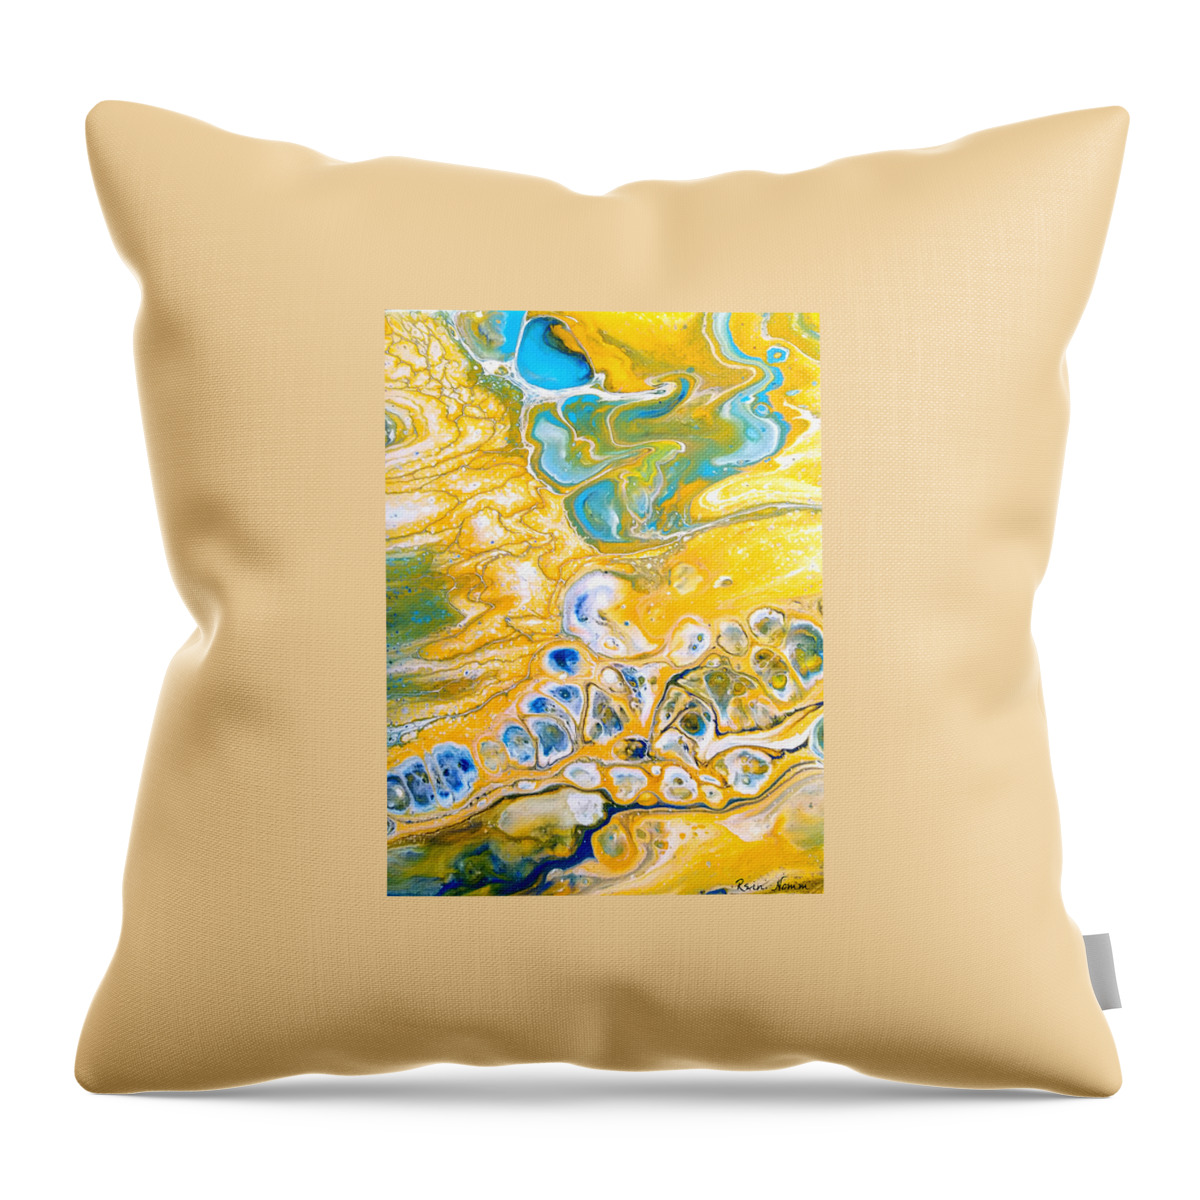  Throw Pillow featuring the painting Oasis by Rein Nomm